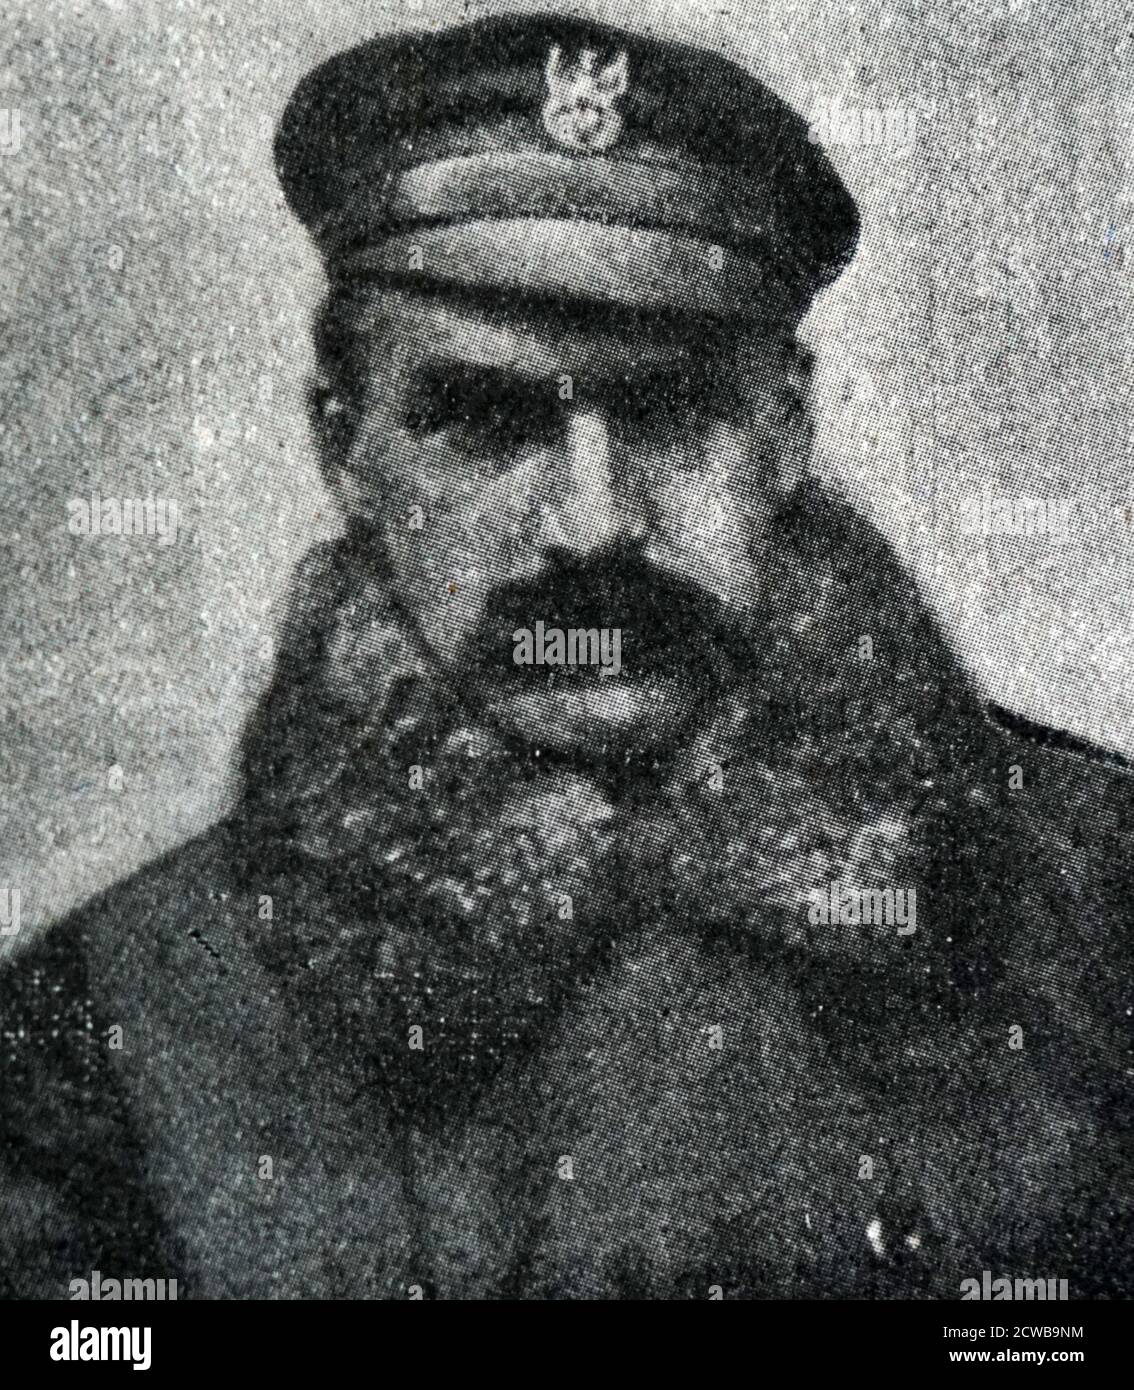 Jozef Klemens Pilsudski (1867 - 1935), Polish statesman who served as the Chief of State (1918-22) and First Marshal of Poland (from 1920). He was considered the de facto leader (1926-35) of the Second Polish Republic Stock Photo